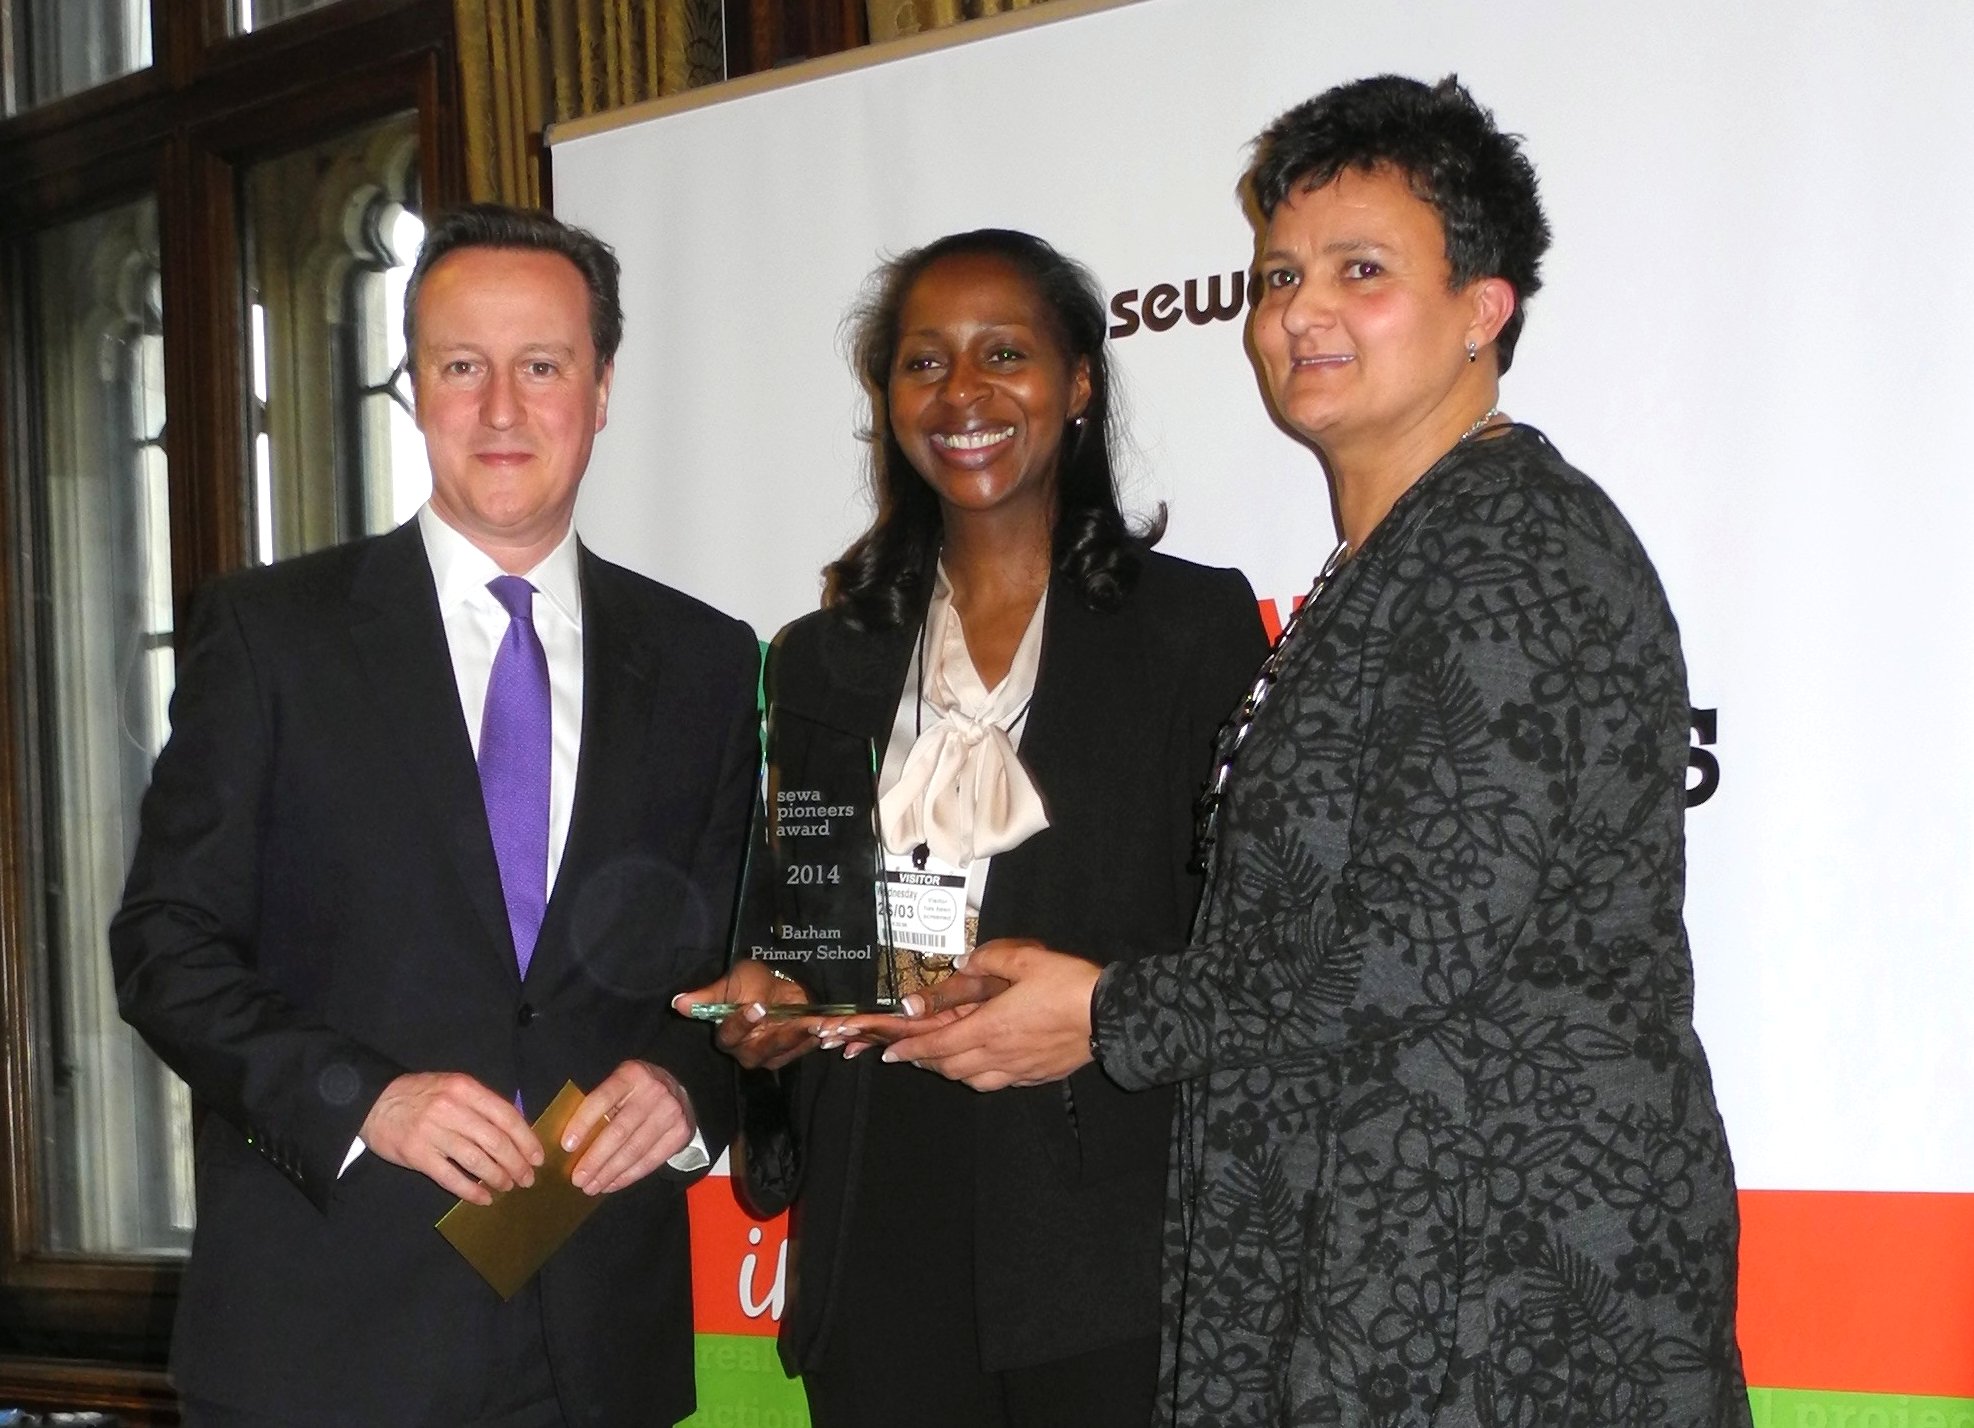 UK Prime Minister David Cameron presented an award to Karen Giles, Headteacher, and Ms Heaton from Barham Primary School. The school in Wembley has supported Sewa Day for the past three years.